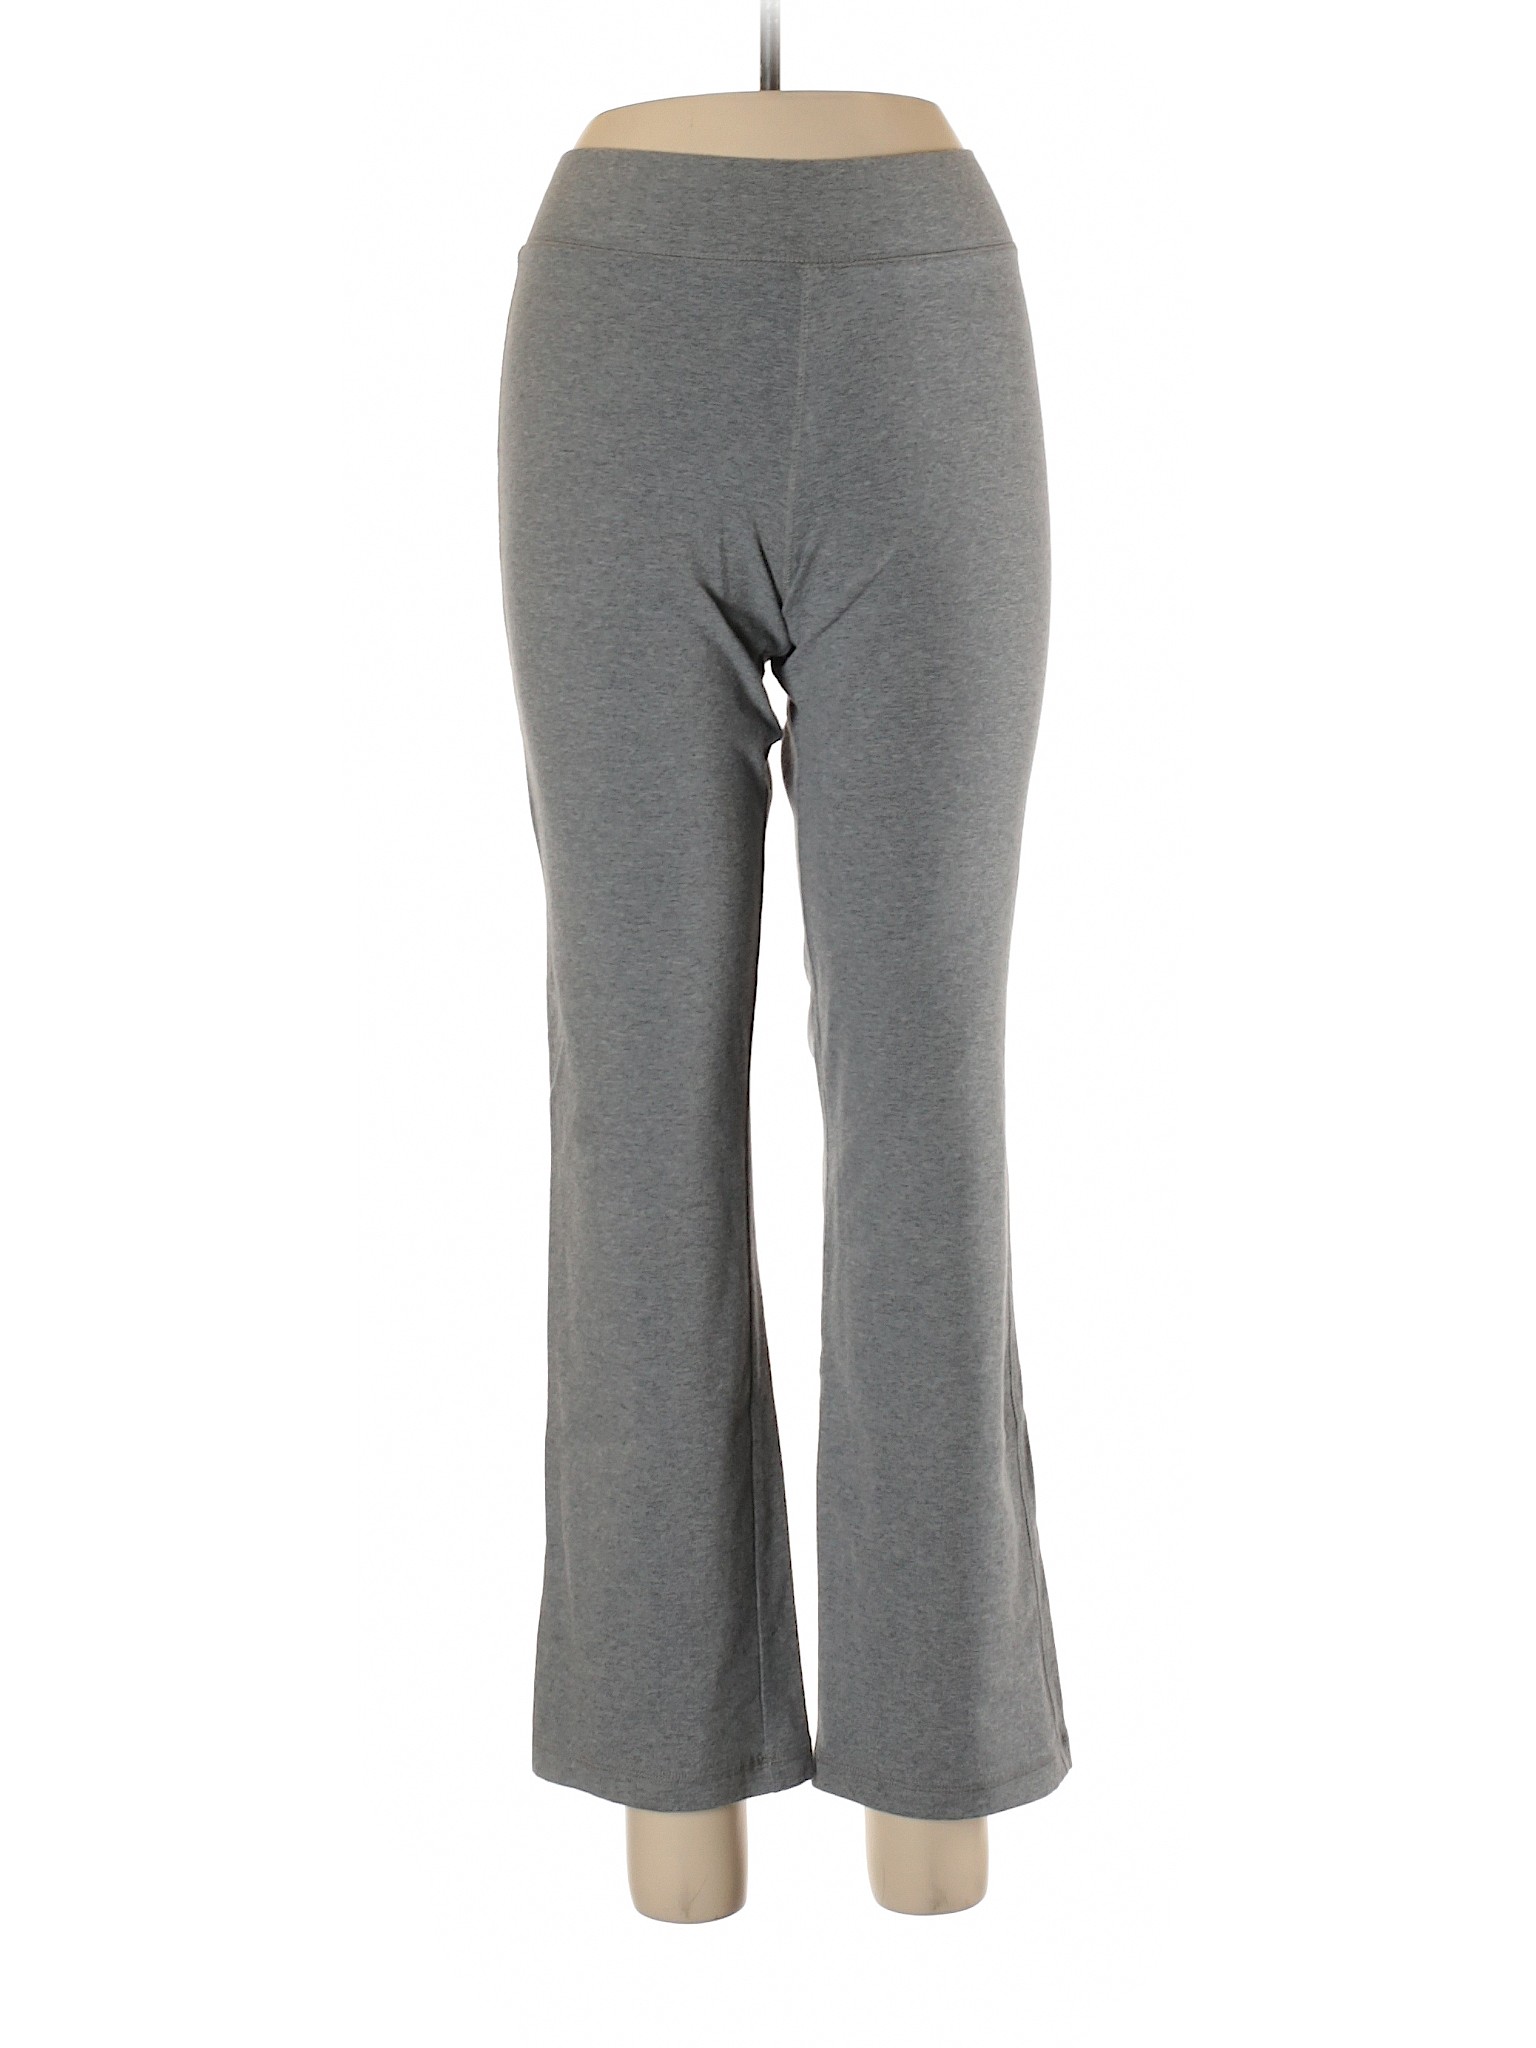 SONOMA life + style Solid Gray Active Pants Size M - 88% off | thredUP